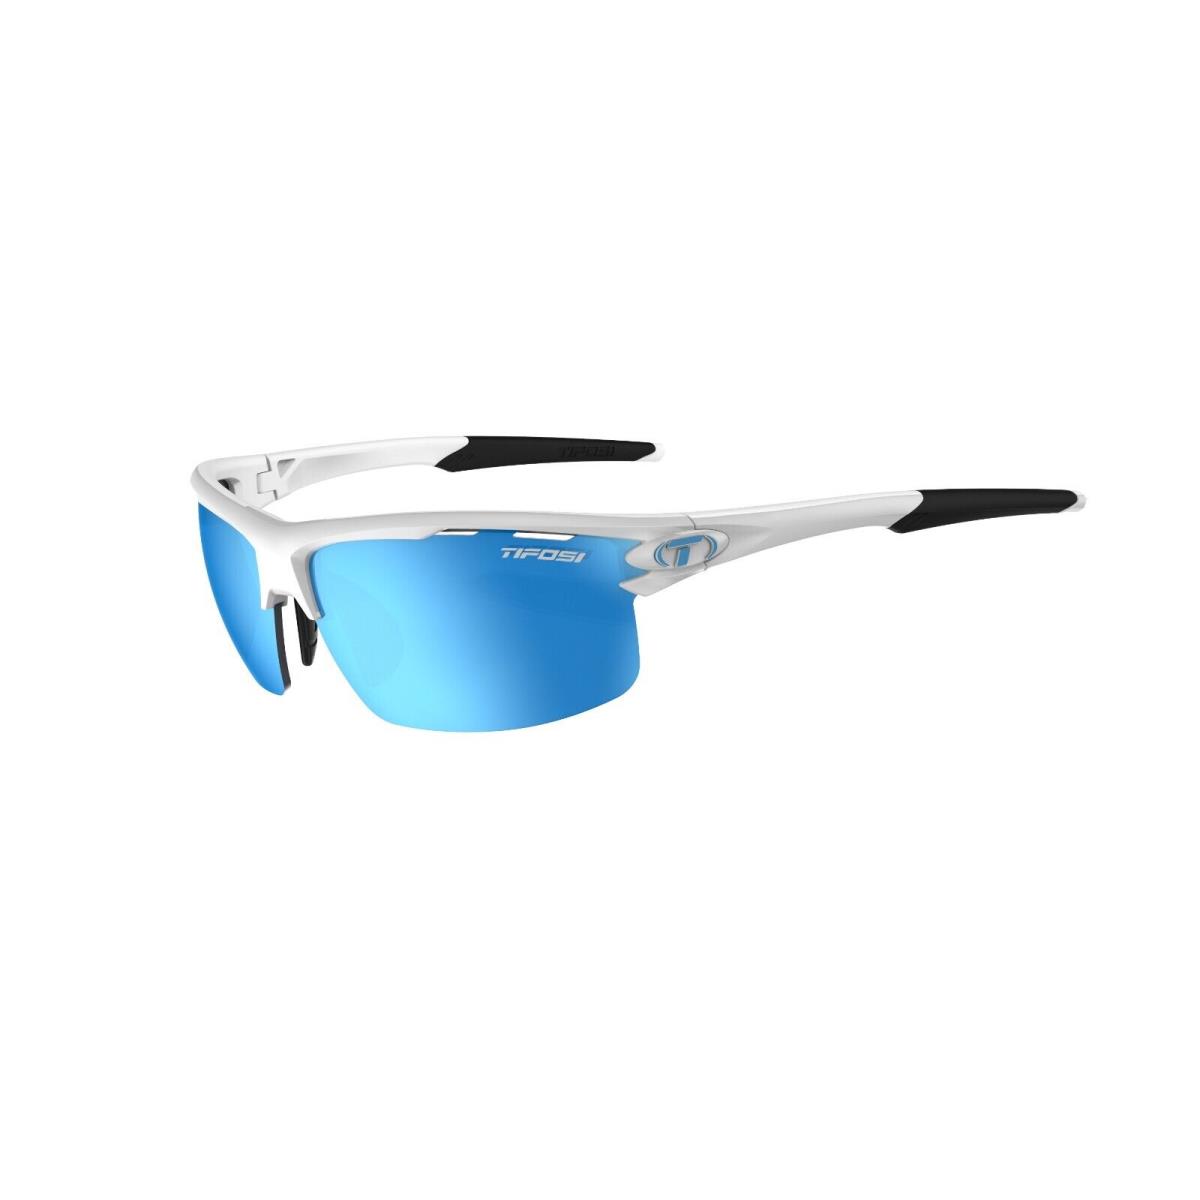 Tifosi Rivet Blackout Crystal Gunmetal White Satin Tactical Readers Sunglasses Matte White Clarion Blue CYCLING